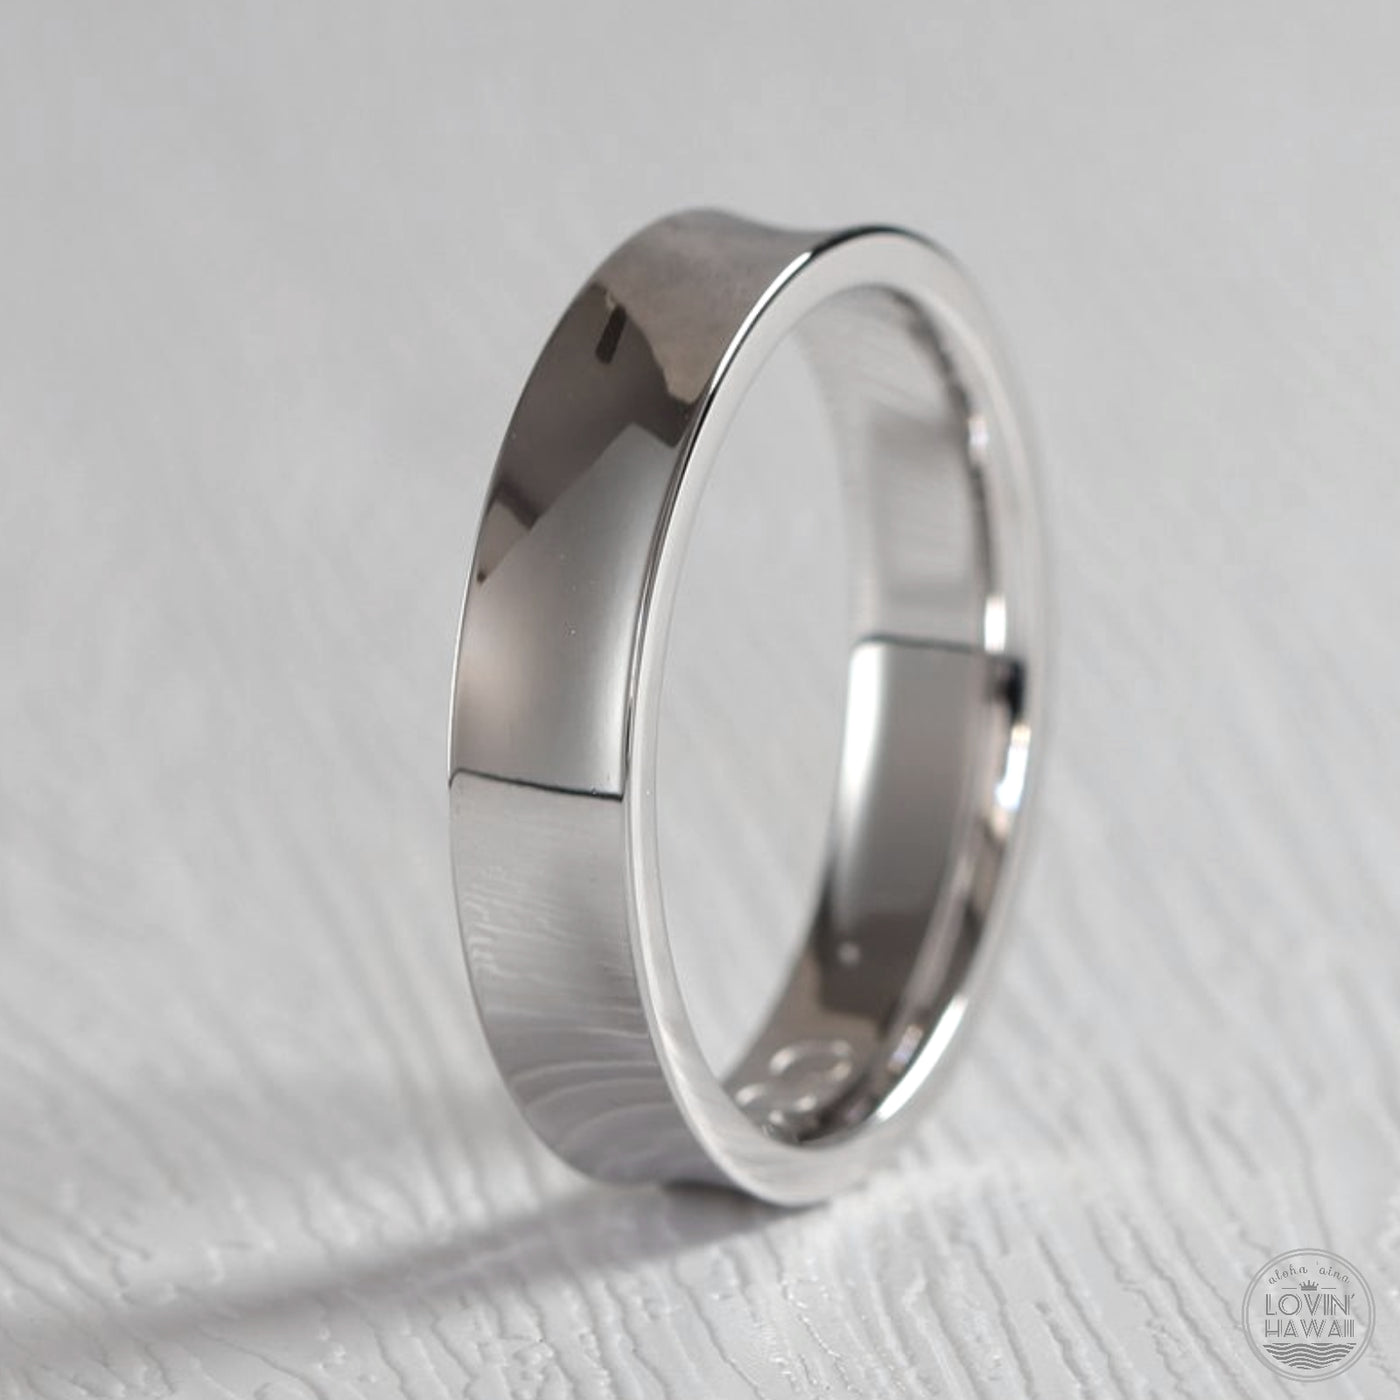 Concave wedding band in 14k gold